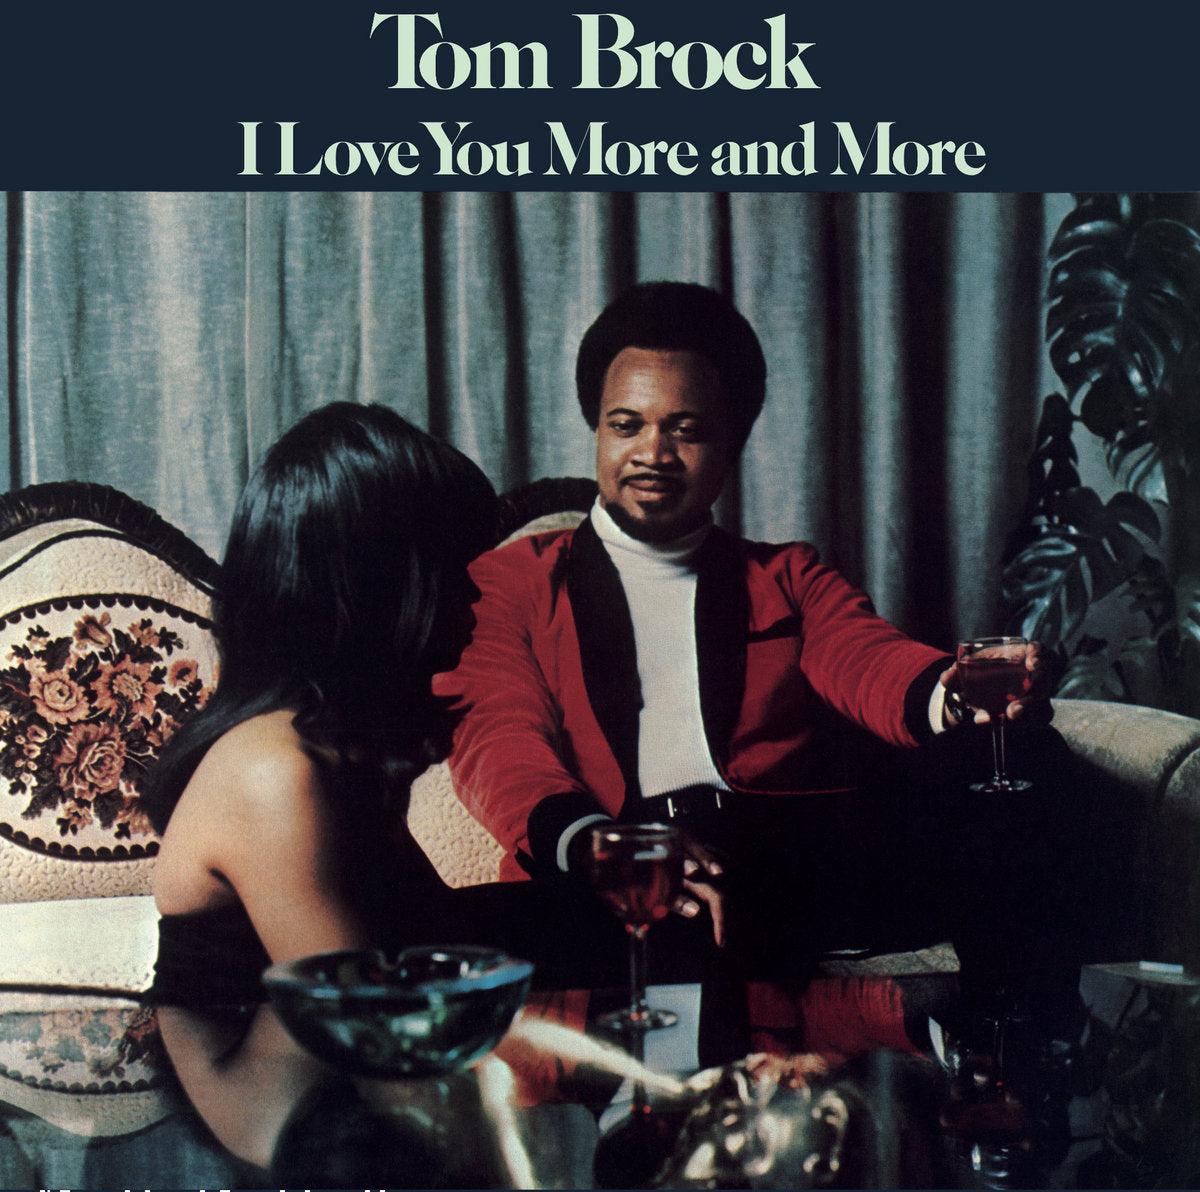 TOM BROCK - I Love You More and More - LP - Vinyl